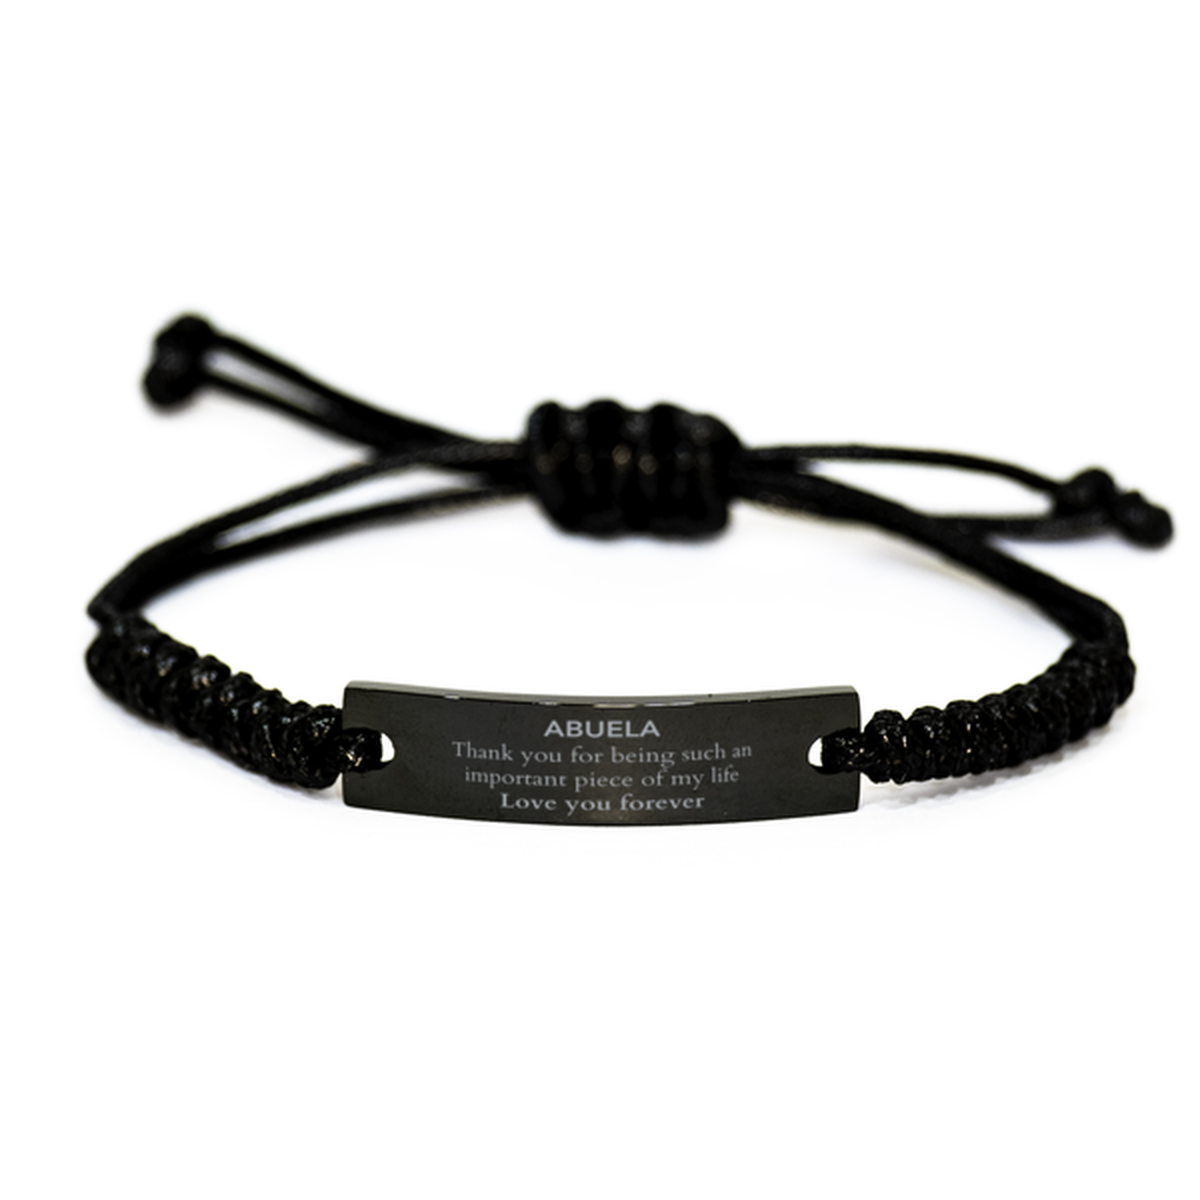 Appropriate Abuela Black Rope Bracelet Epic Birthday Gifts for Abuela Thank you for being such an important piece of my life Abuela Christmas Mothers Fathers Day